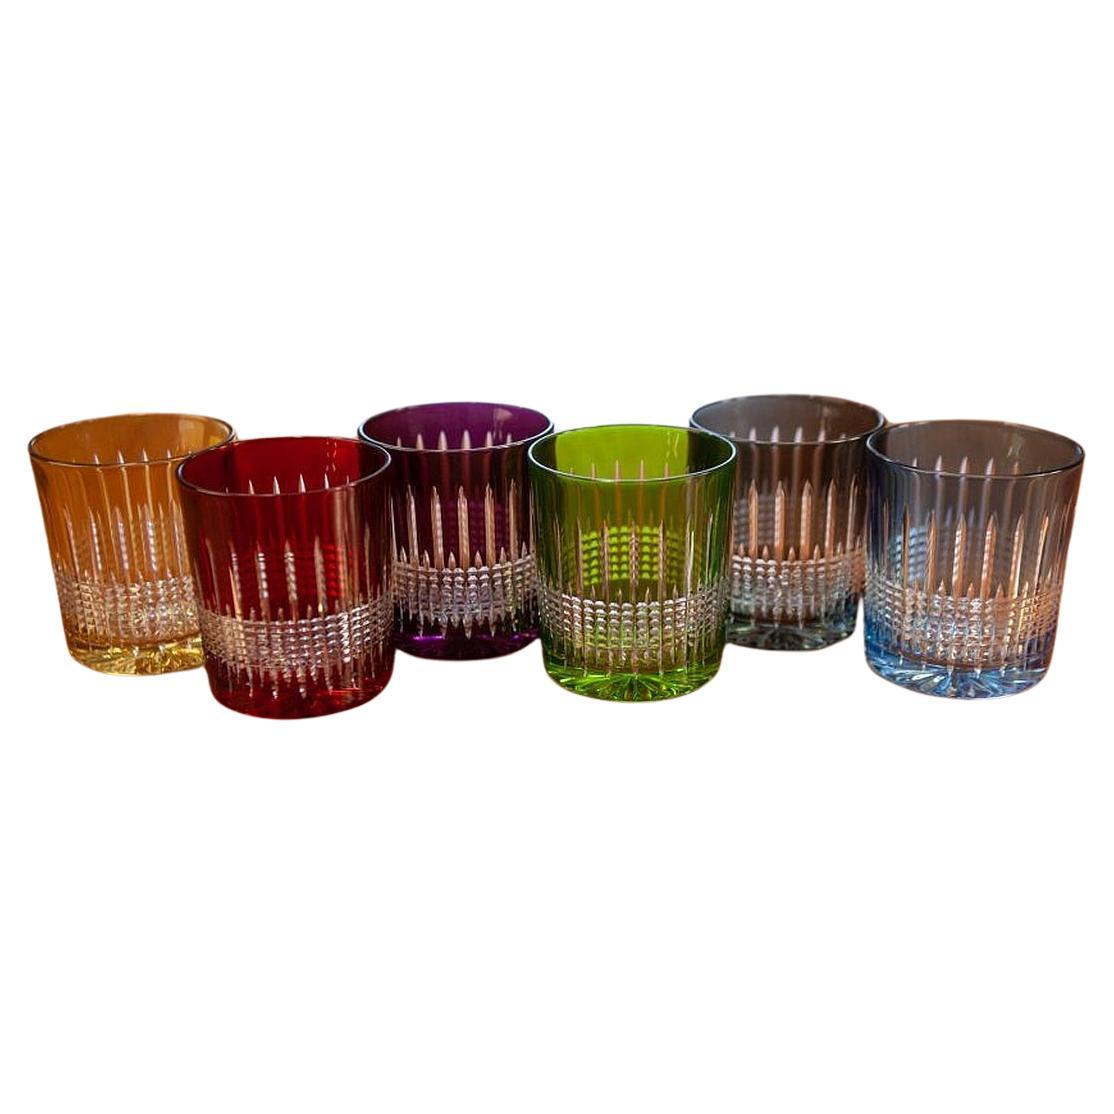 https://a.1stdibscdn.com/set-of-6-new-320-ml-crystal-whiskey-lowball-glasses-in-various-colors-for-sale/f_40741/f_369366221699120680404/f_36936622_1699120680716_bg_processed.jpg